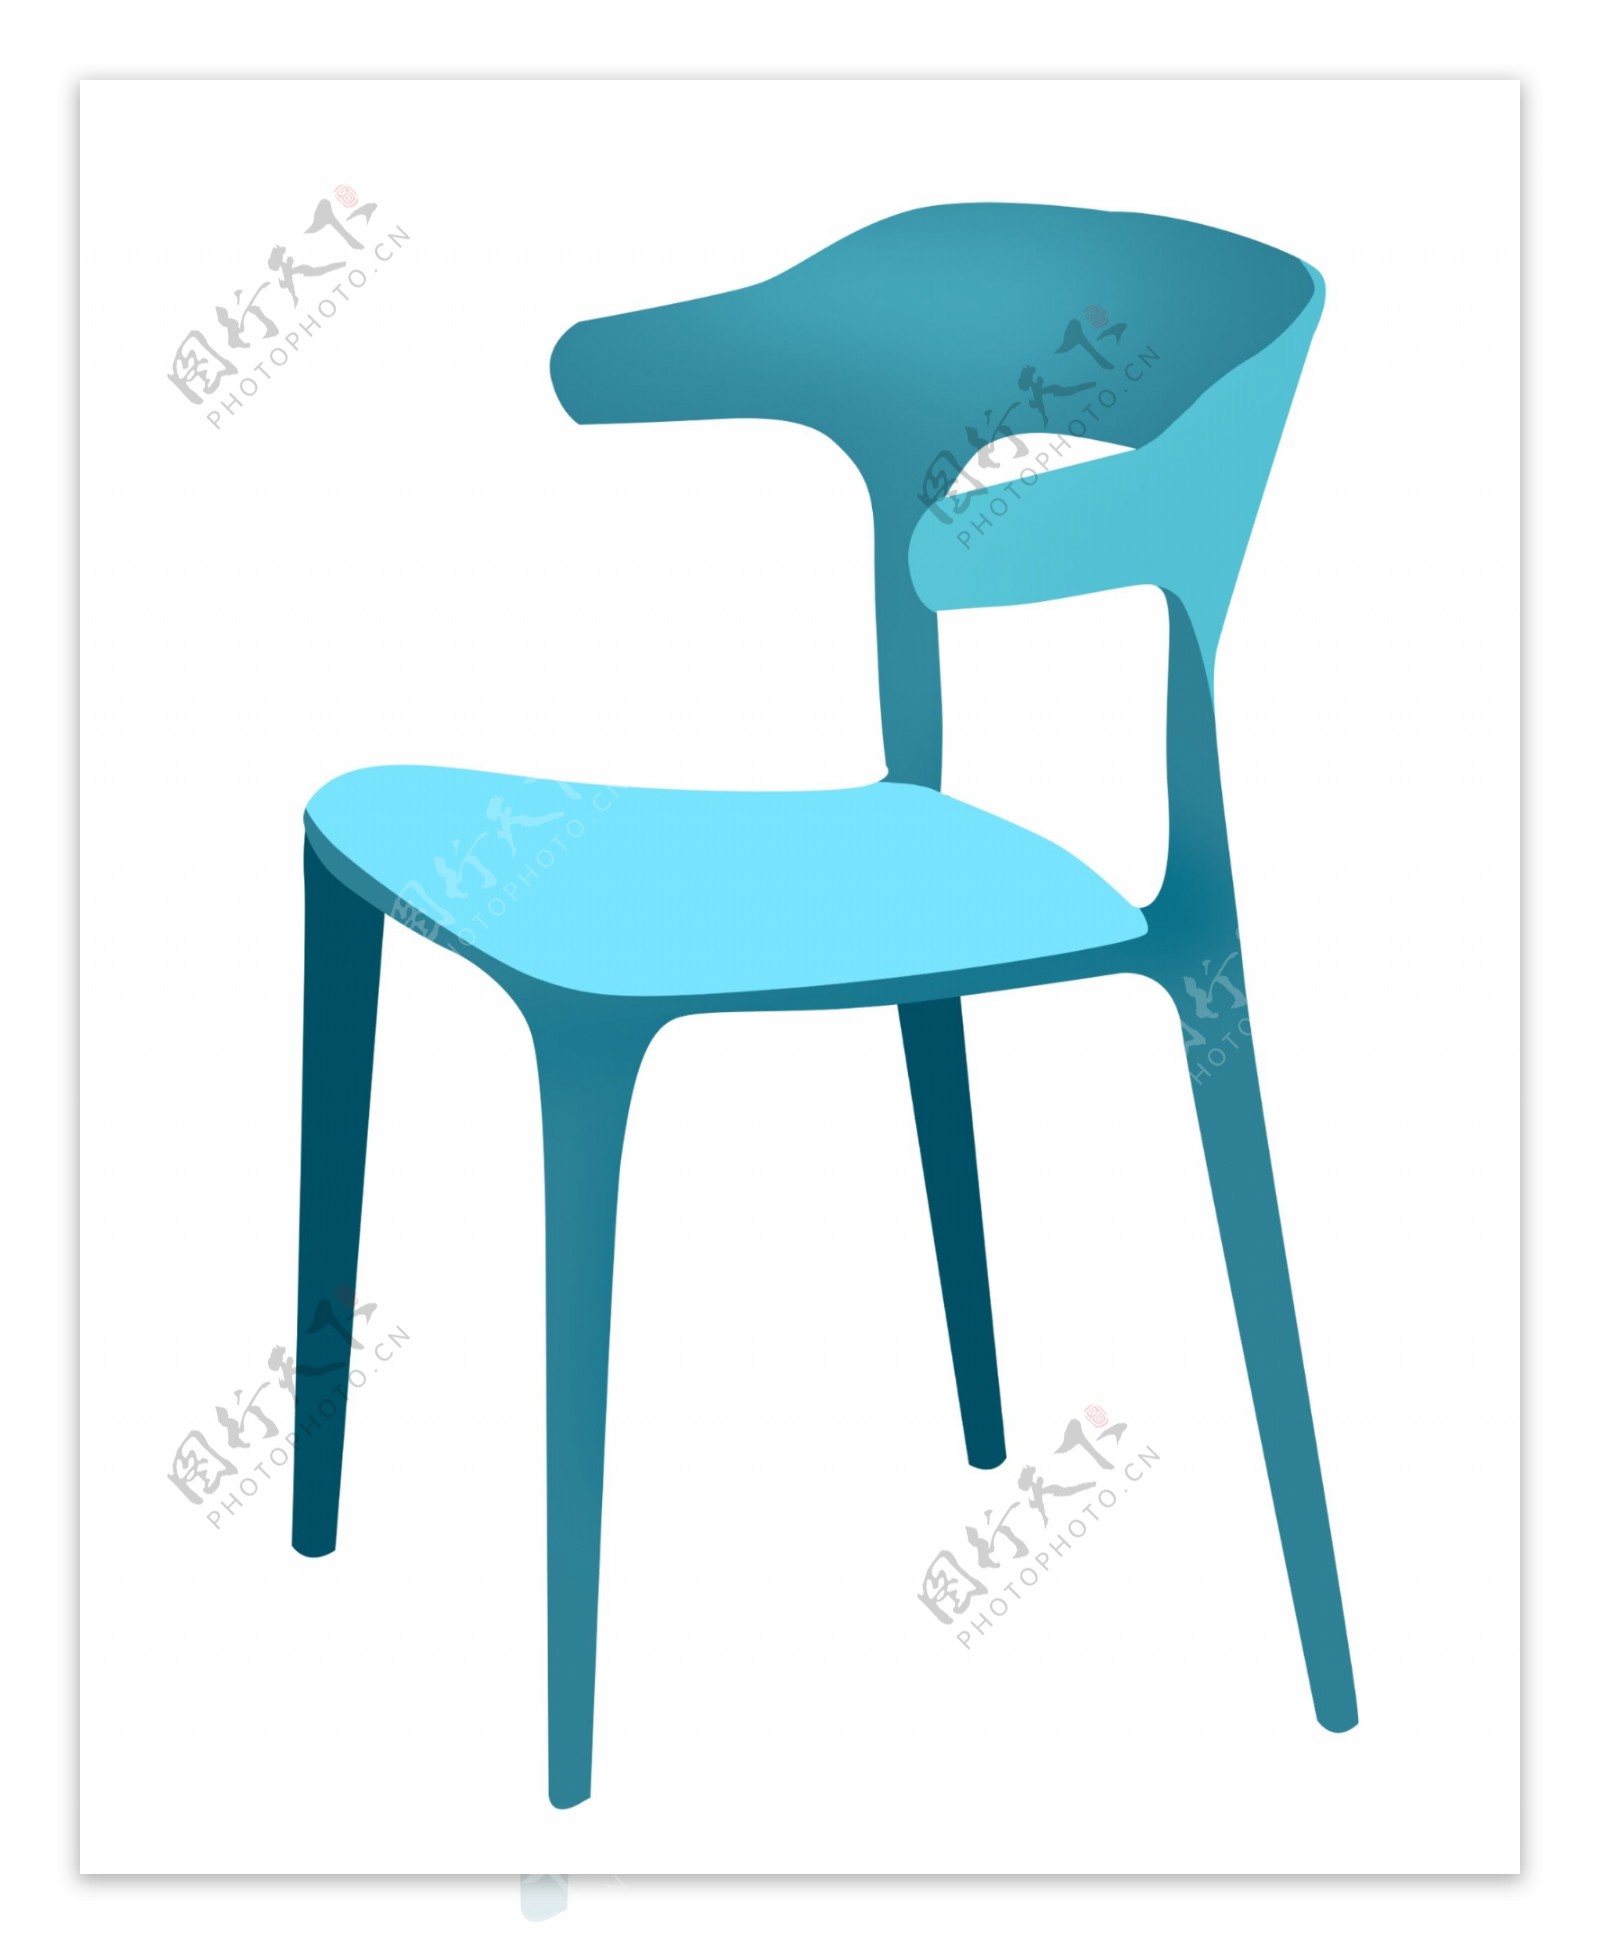 Buckle Vector Hd Images, Vector Free Buckle Cartoon Chair, Furniture, Simple Decoration, Home ...